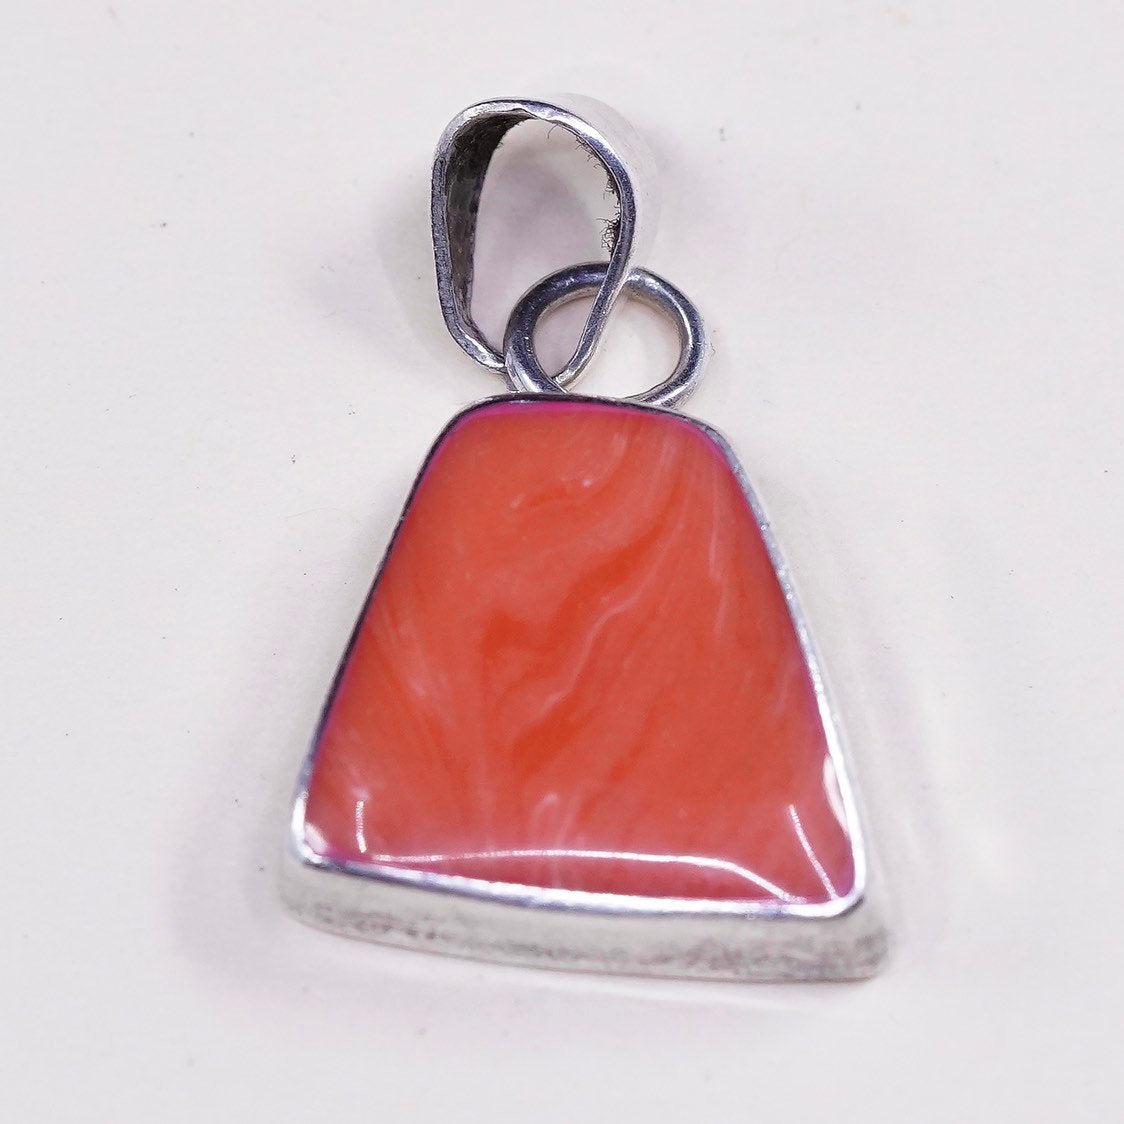 VTG handmade sterling silver pendant, Mexico 925 with orange agate